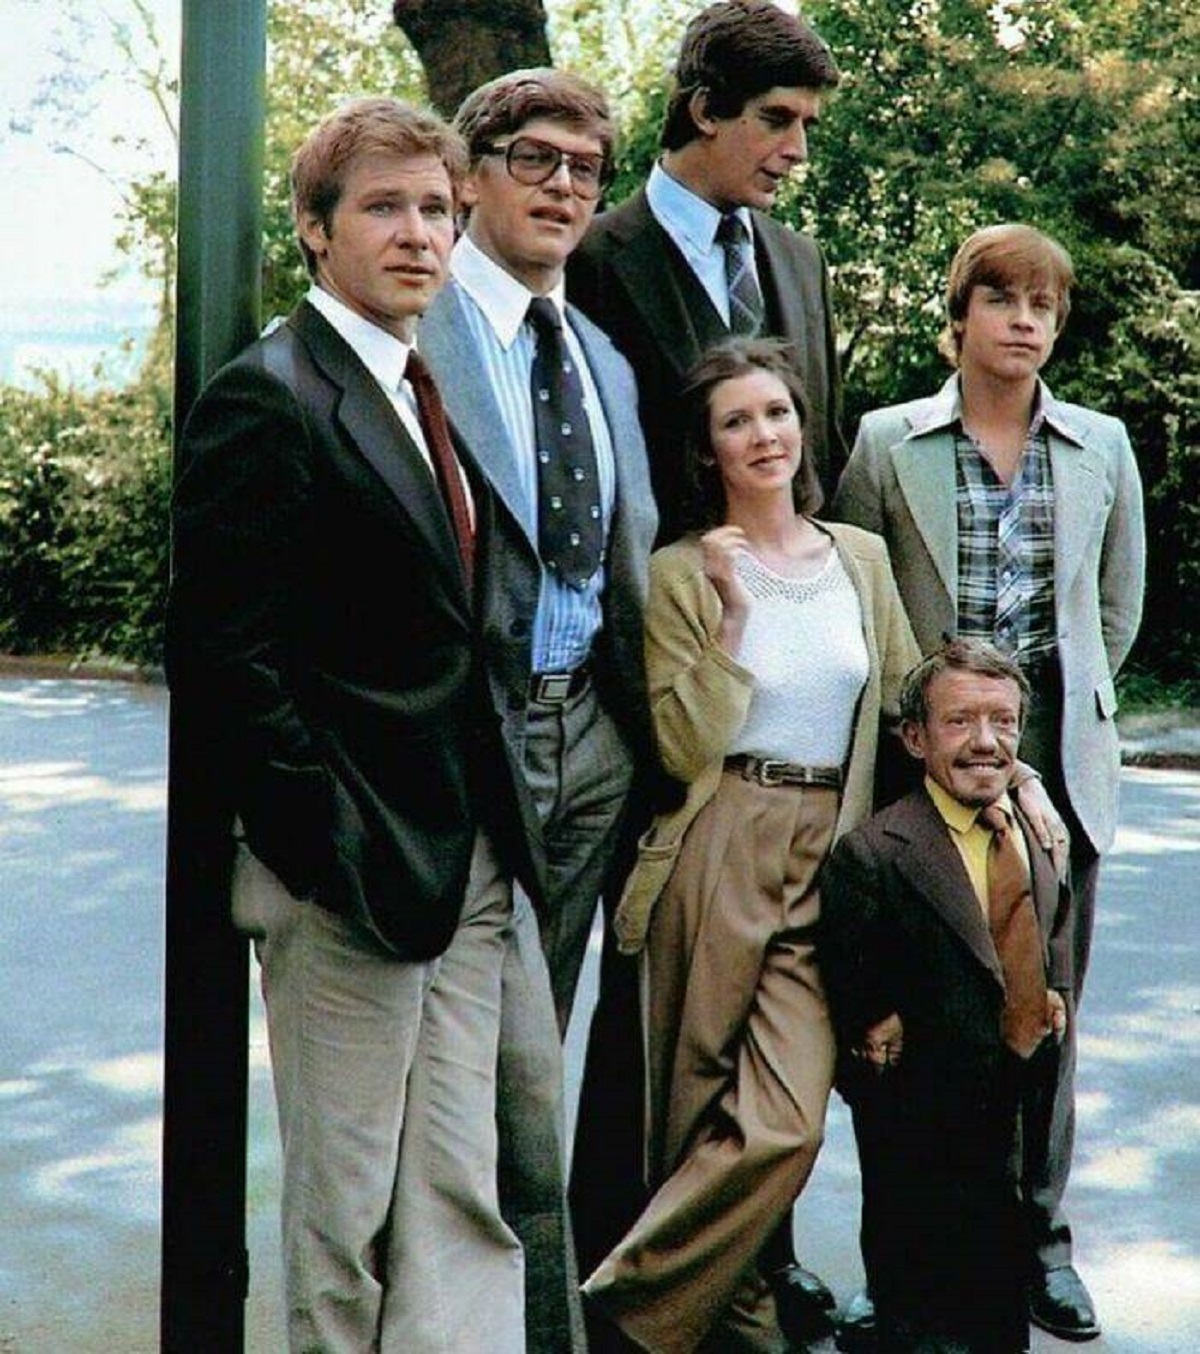 "Cast Of Star Wars Out Of Costume In 1977"